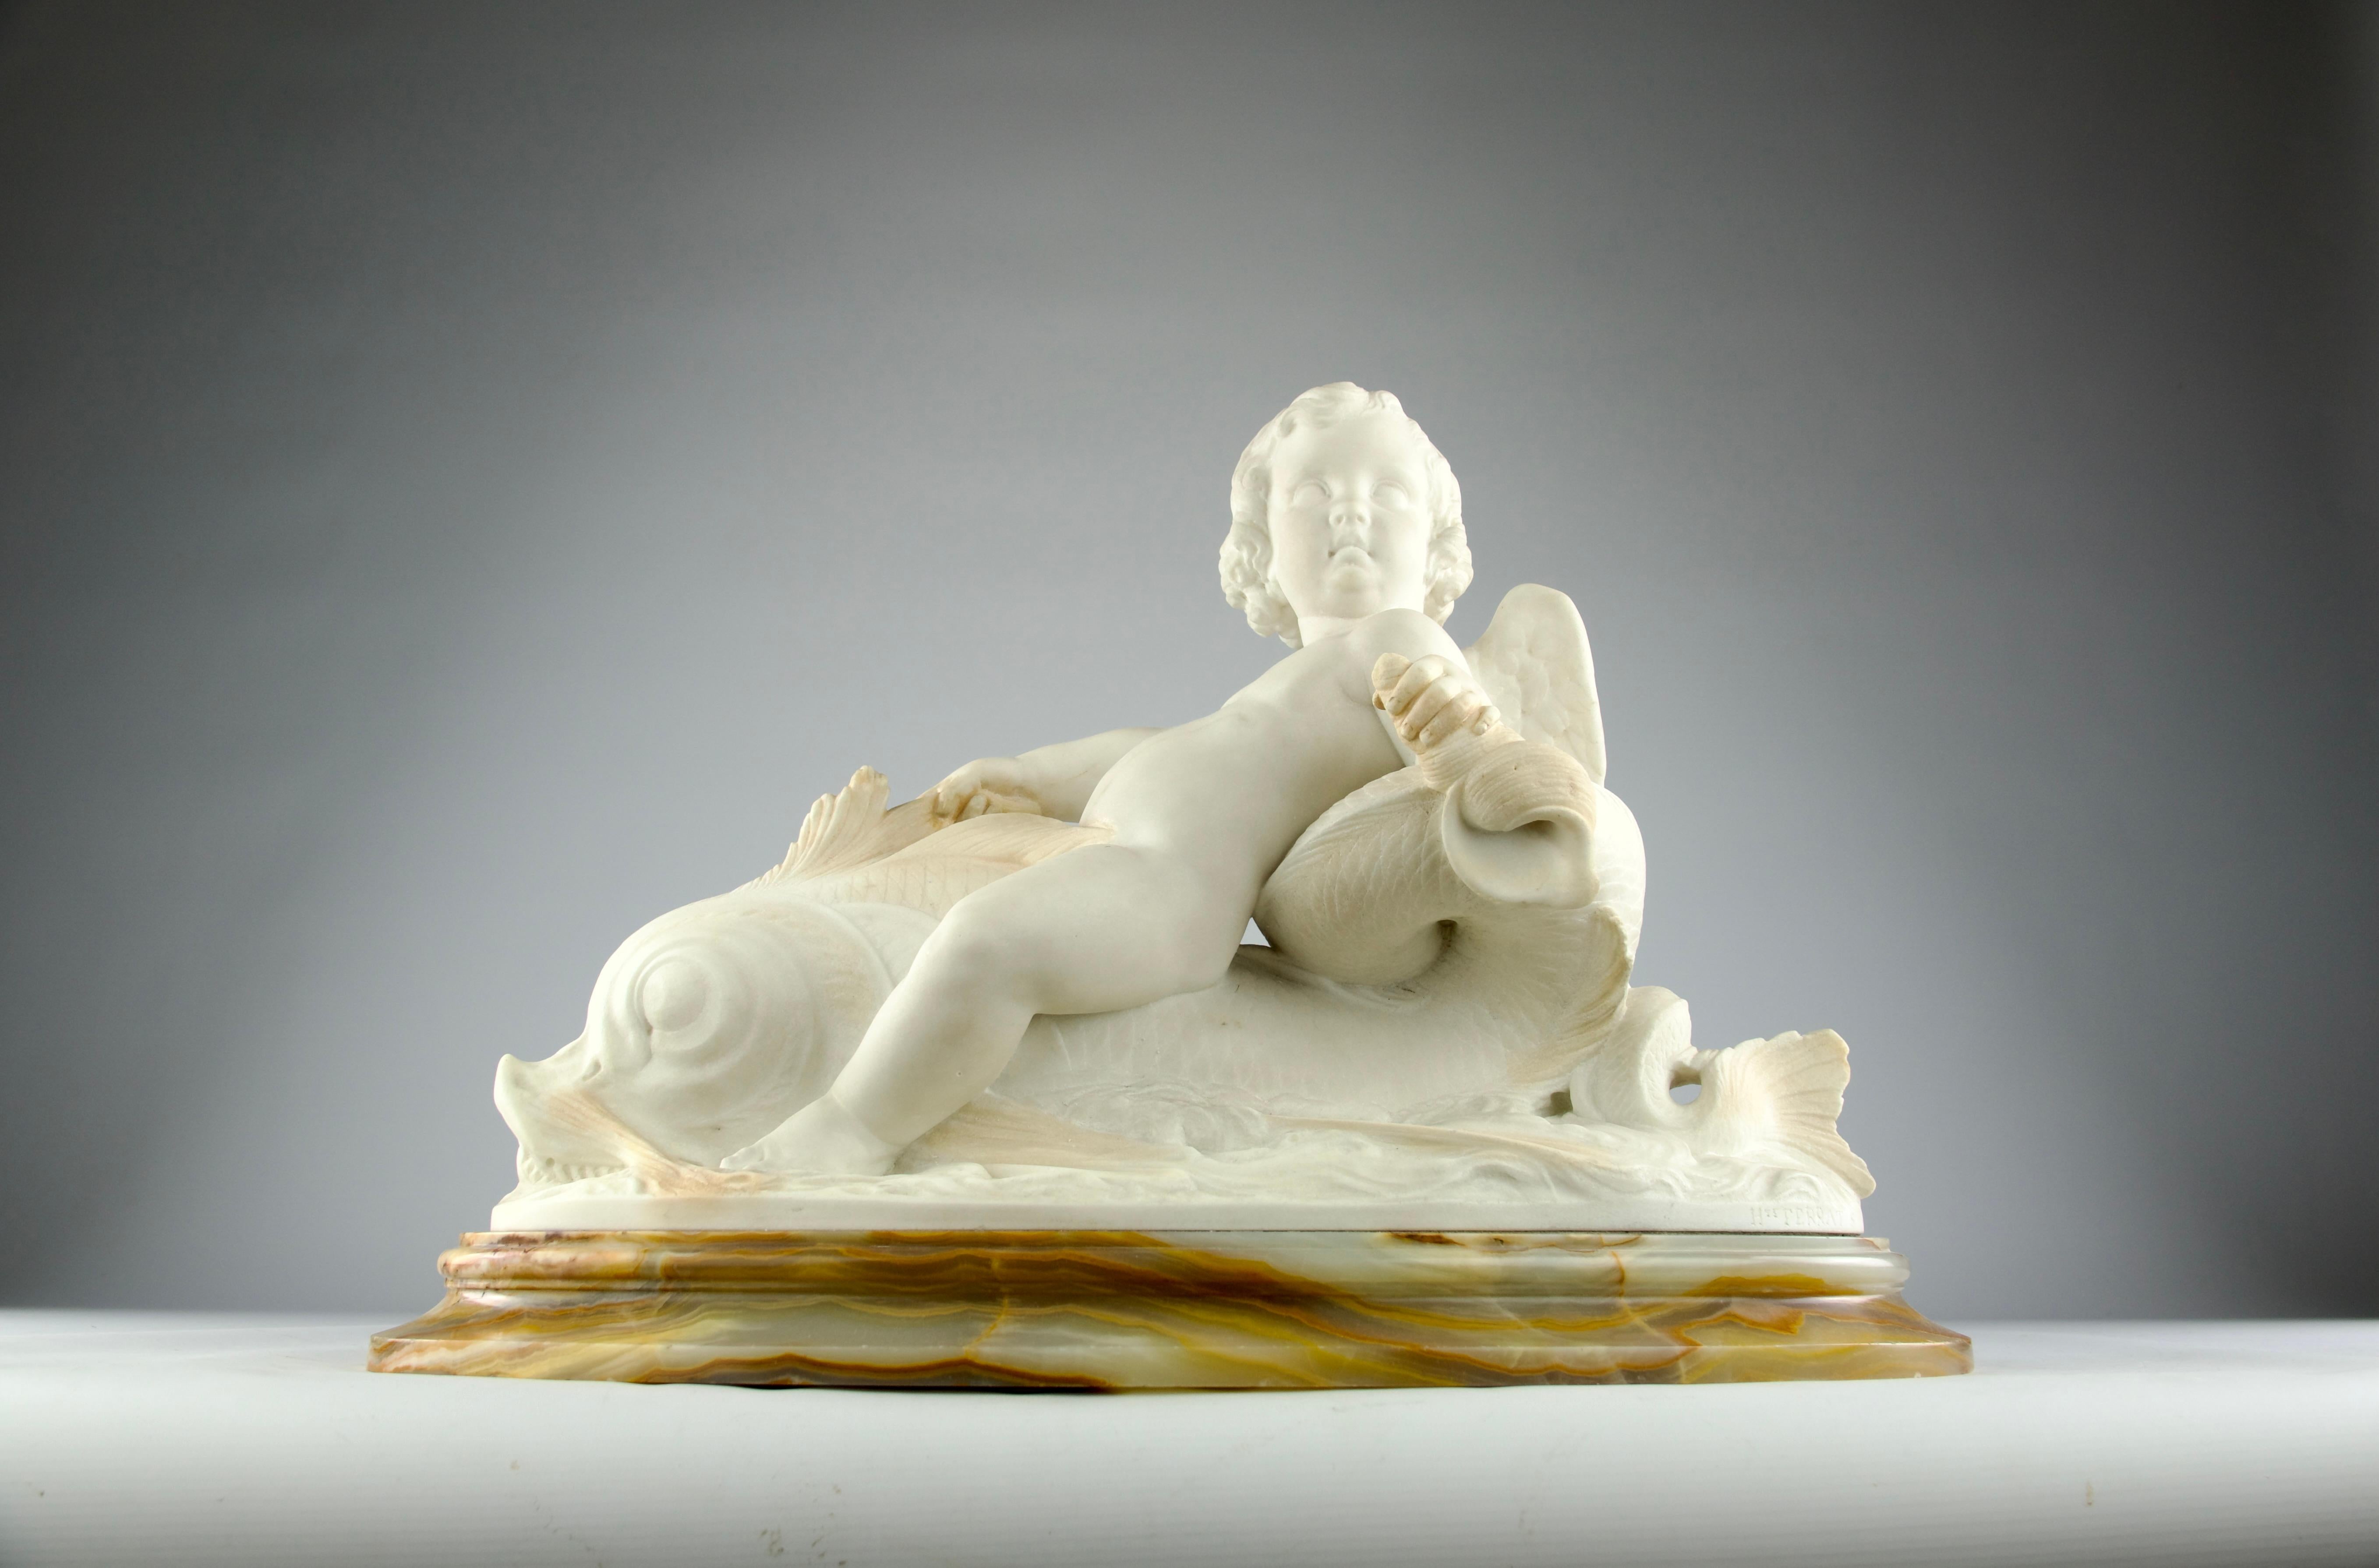 Superb, large and exquisitely detailed Carrara marble sculpture of a cherub riding a dolphin by Hippolyte Ferrat, France 19th century, Romantic period. Signed.

In very good condition.

On a veined marble base which has small signs of